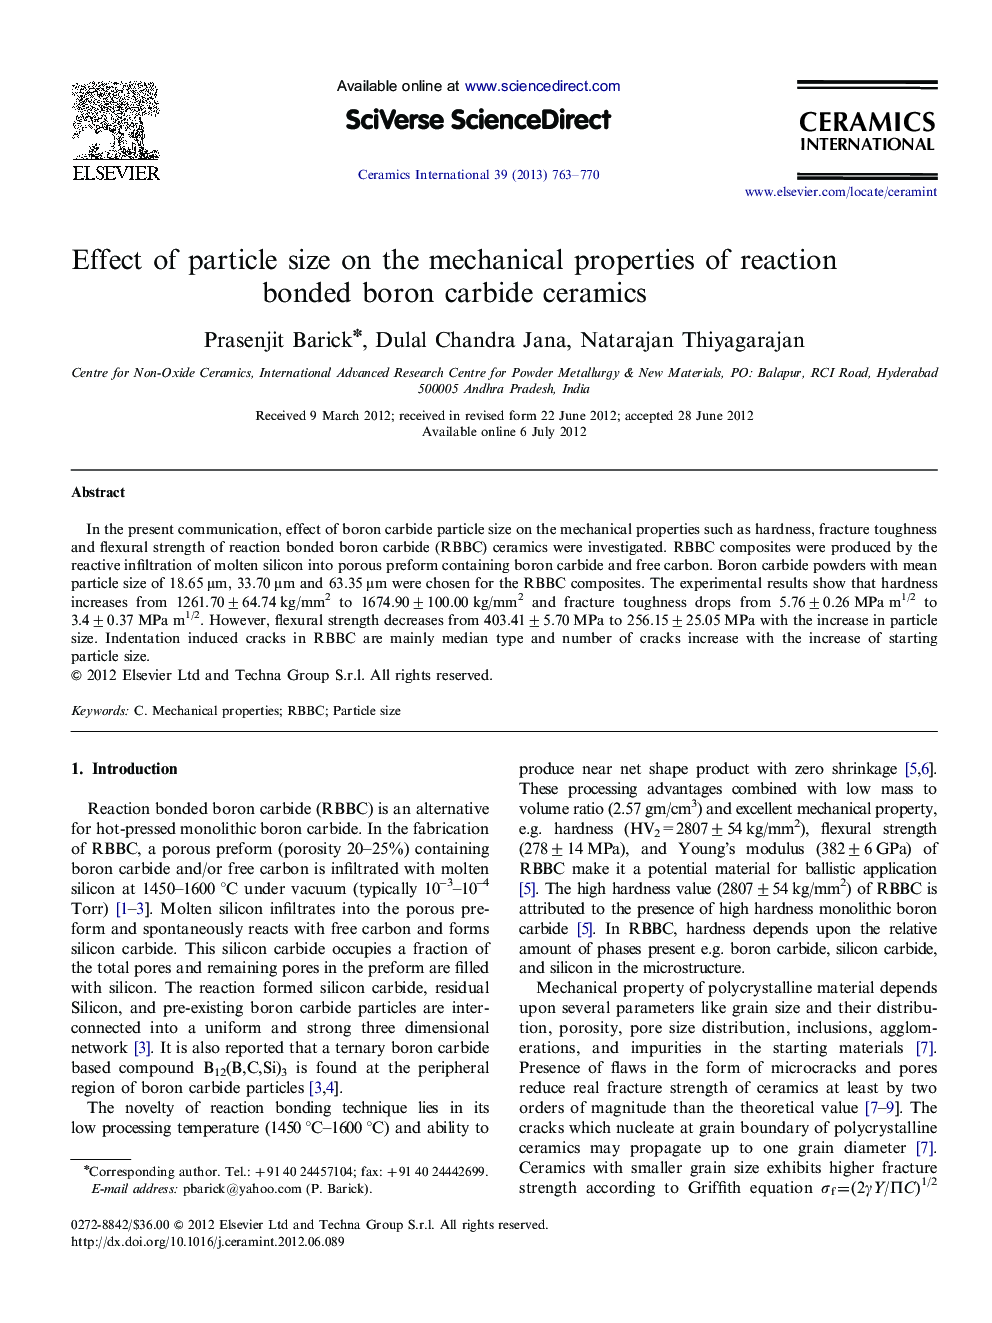 Effect of particle size on the mechanical properties of reaction bonded boron carbide ceramics